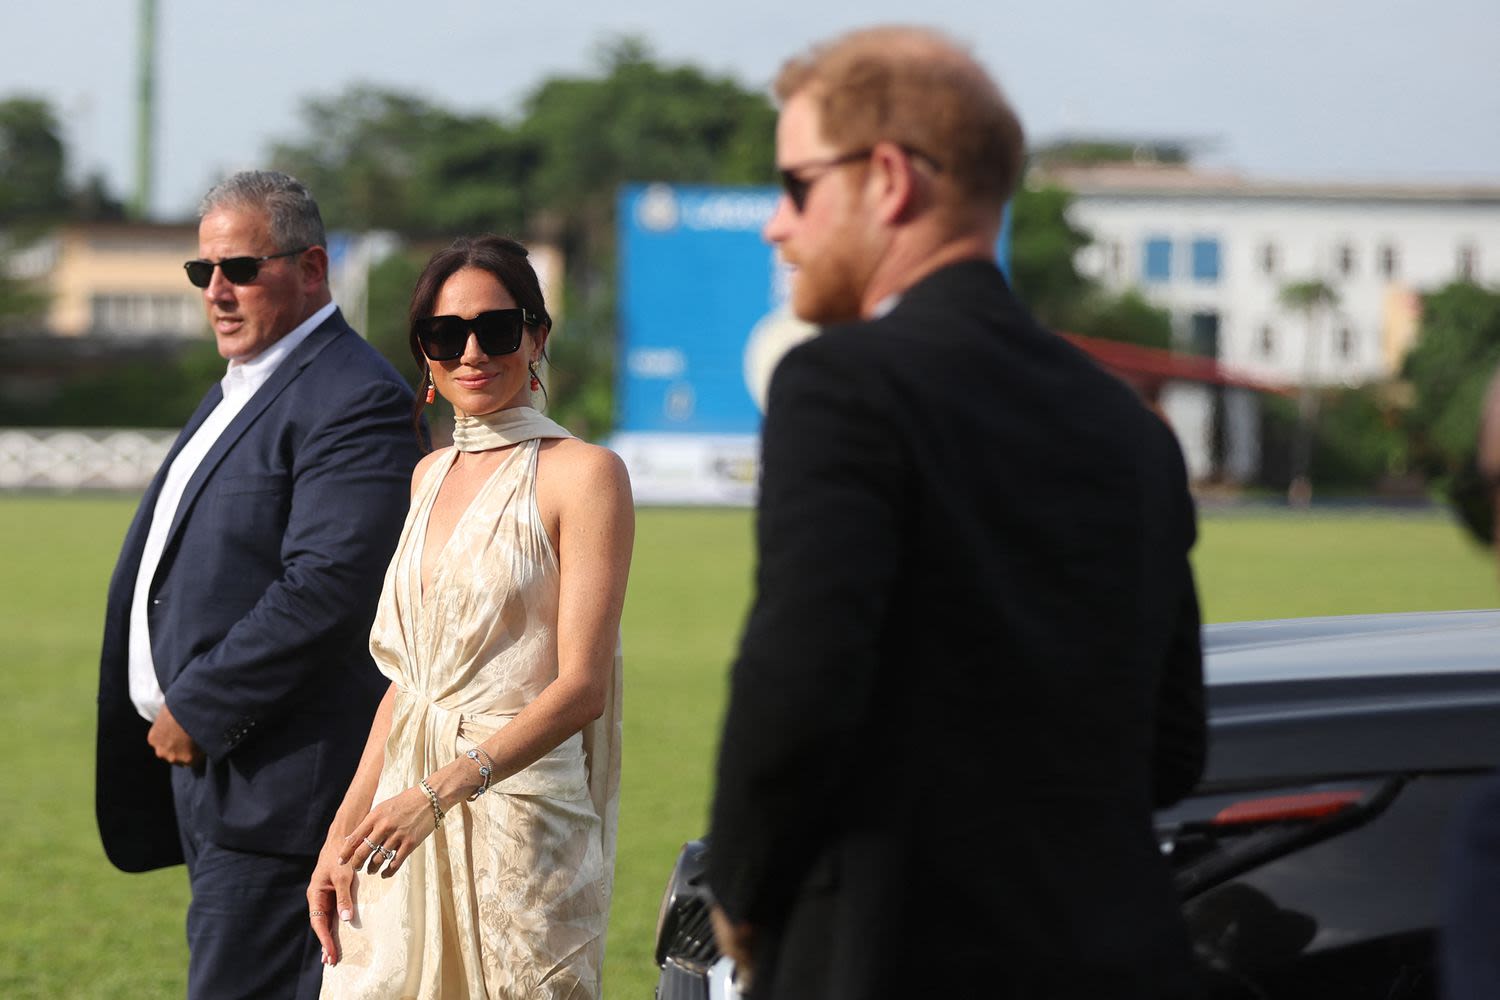 Meghan Markle and Prince Harry Go Glam as They Wrap Nigeria Tour at Polo Club Reception